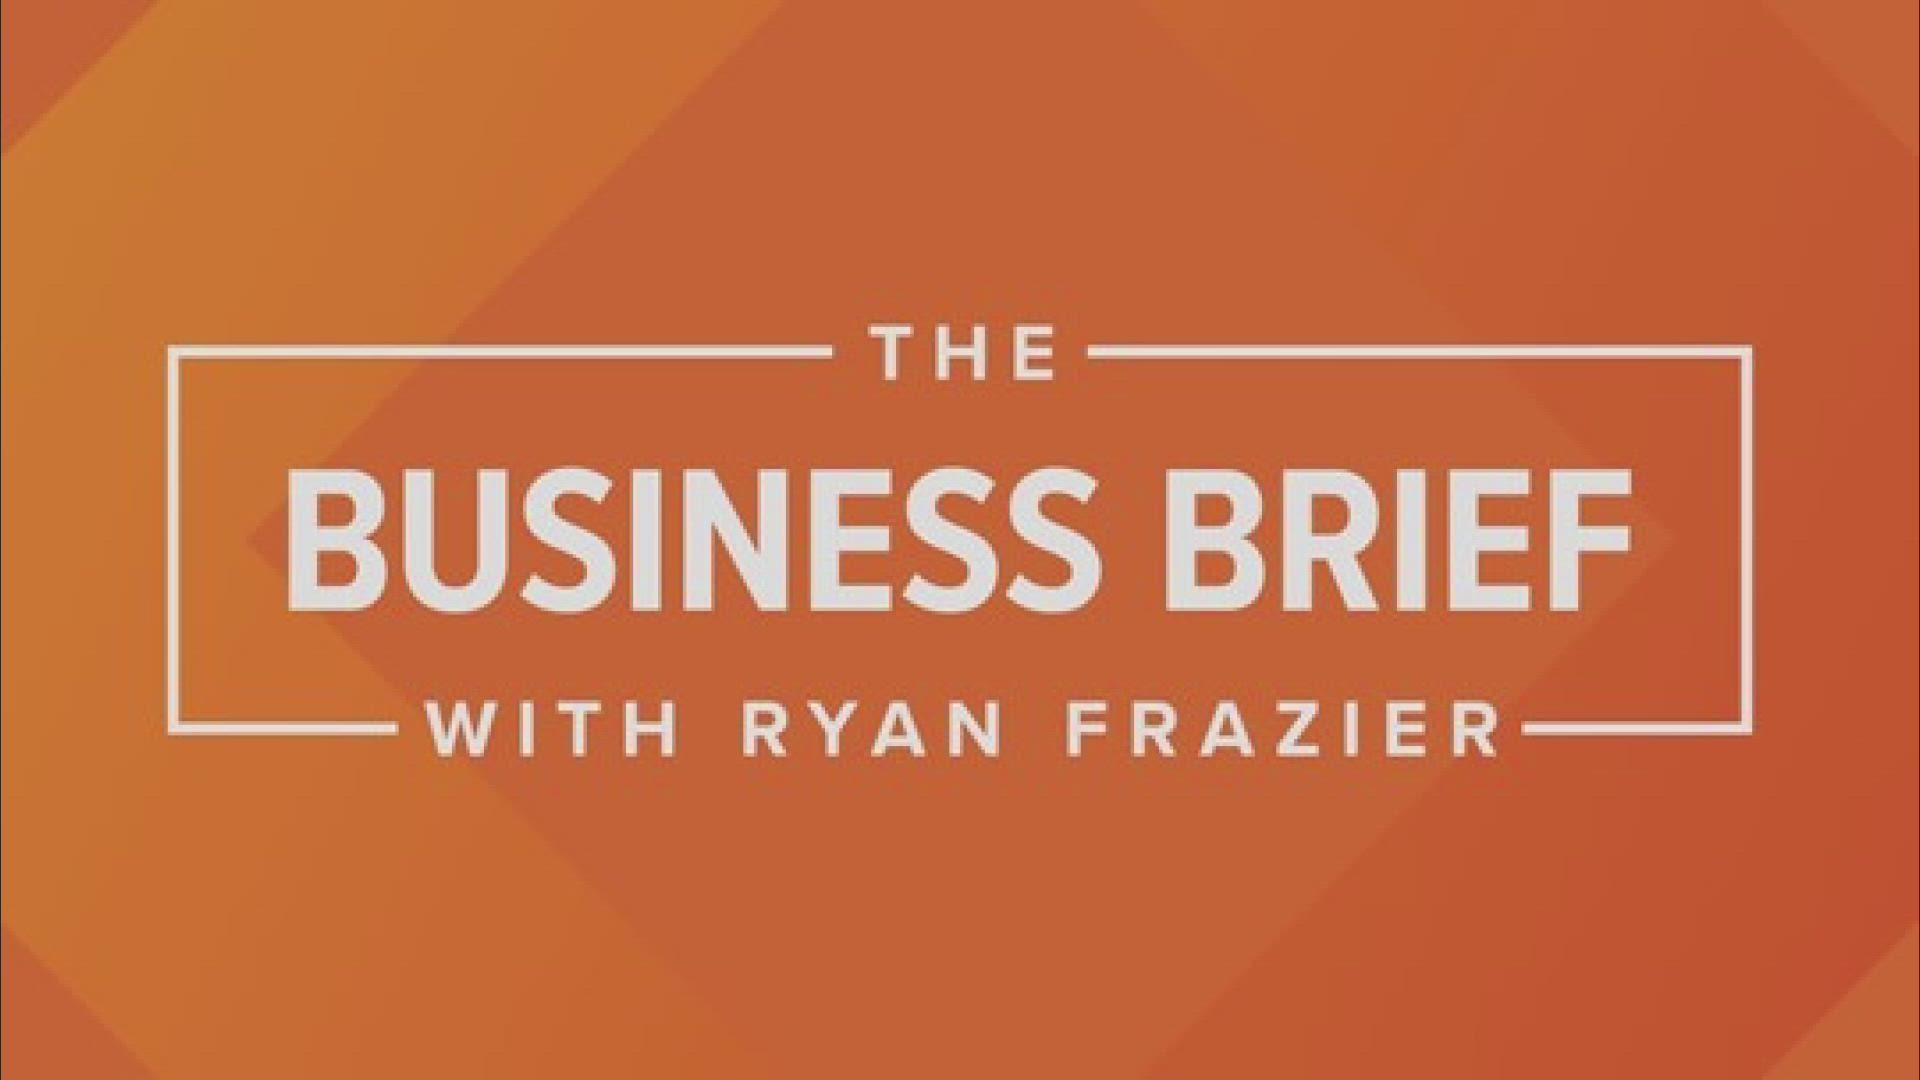 Business Brief's Ryan Frazier hosts Philip Pelto, Firestorm co-founder, to discuss tips for networking and how the networking organization is expanding.